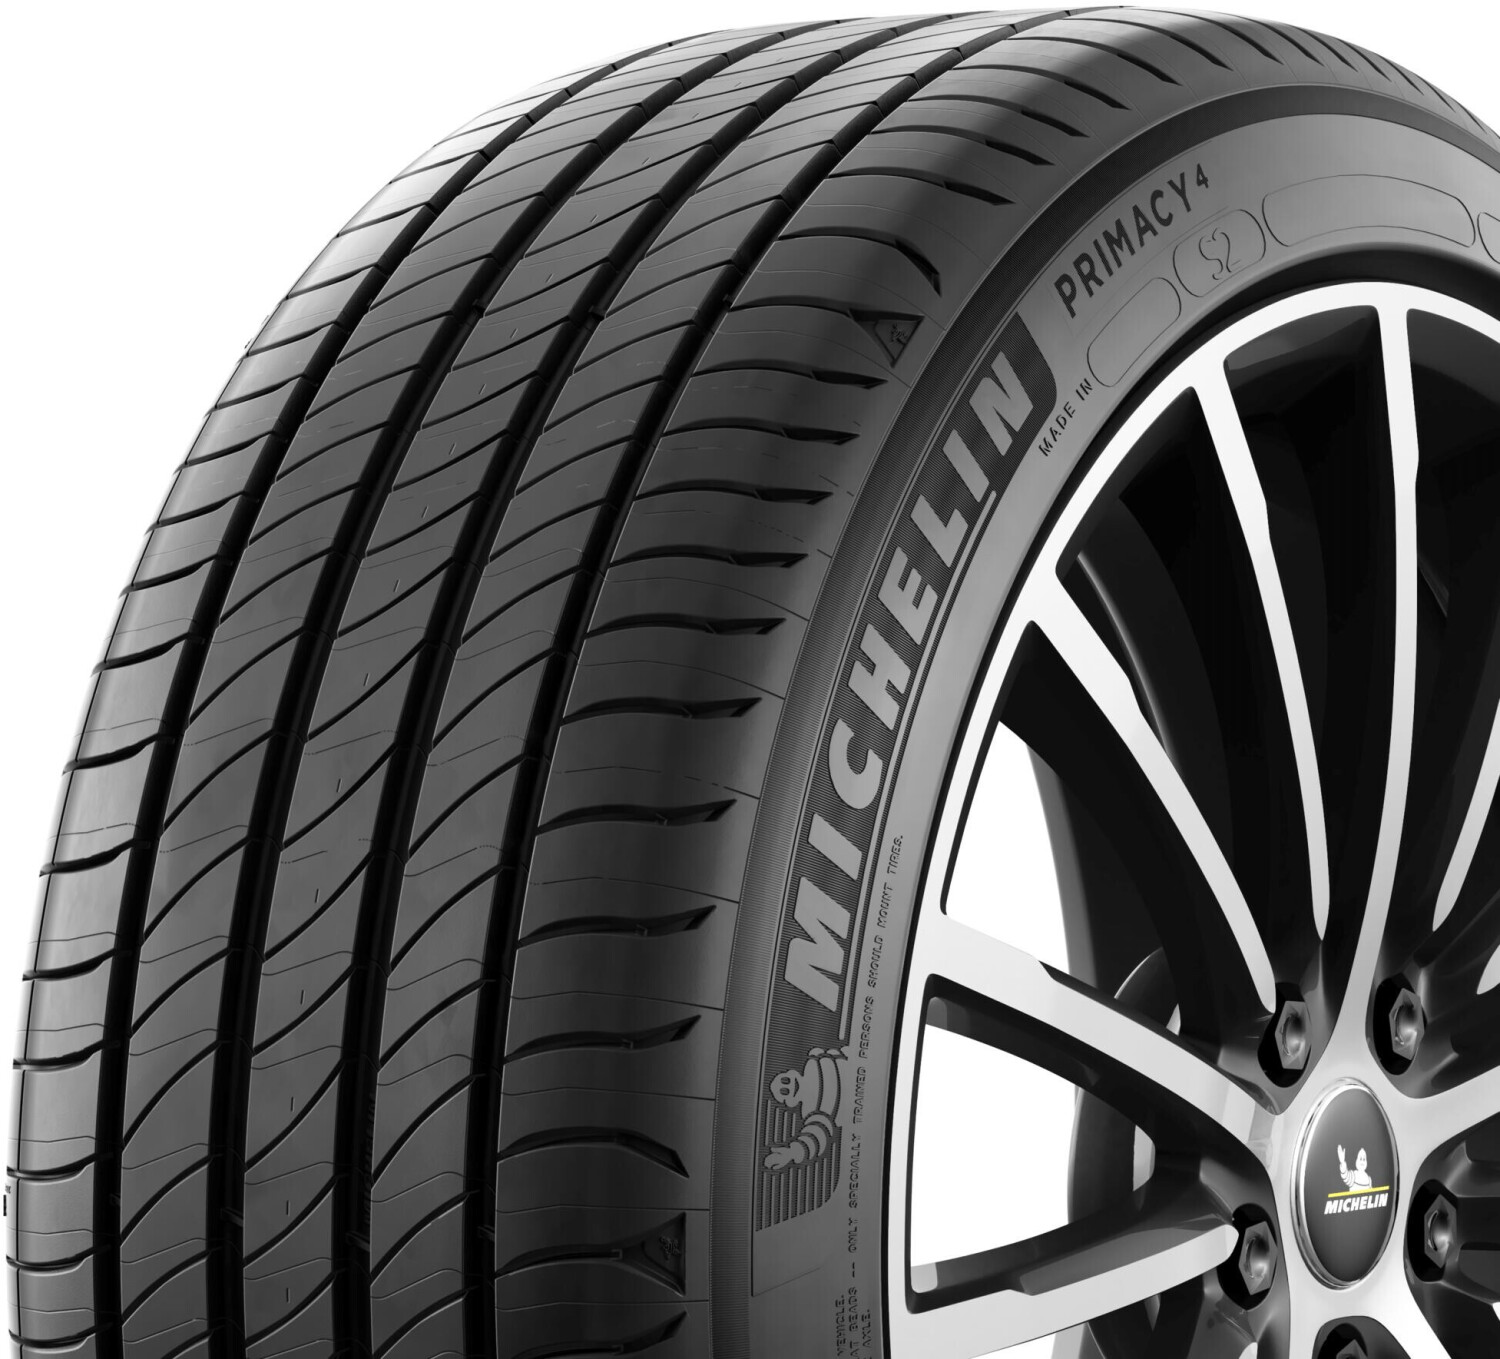 Primacy 225/45 from – 94V £108.51 Michelin S1 Buy Deals R17 Best 4 on XL (Today)